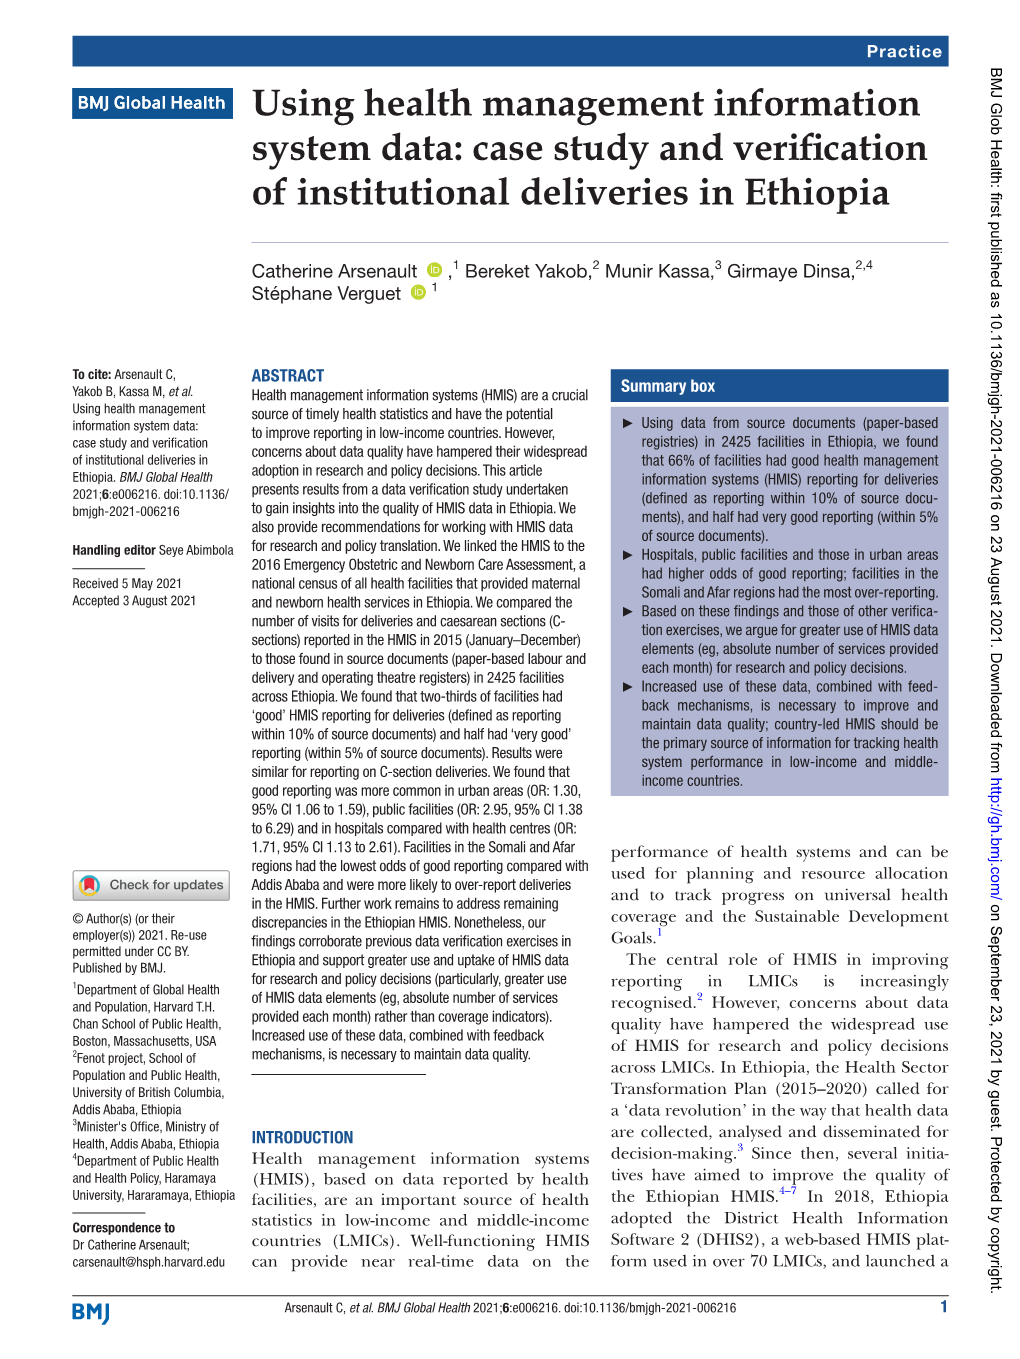 Case Study and Verification of Institutional Deliveries in Ethiopia